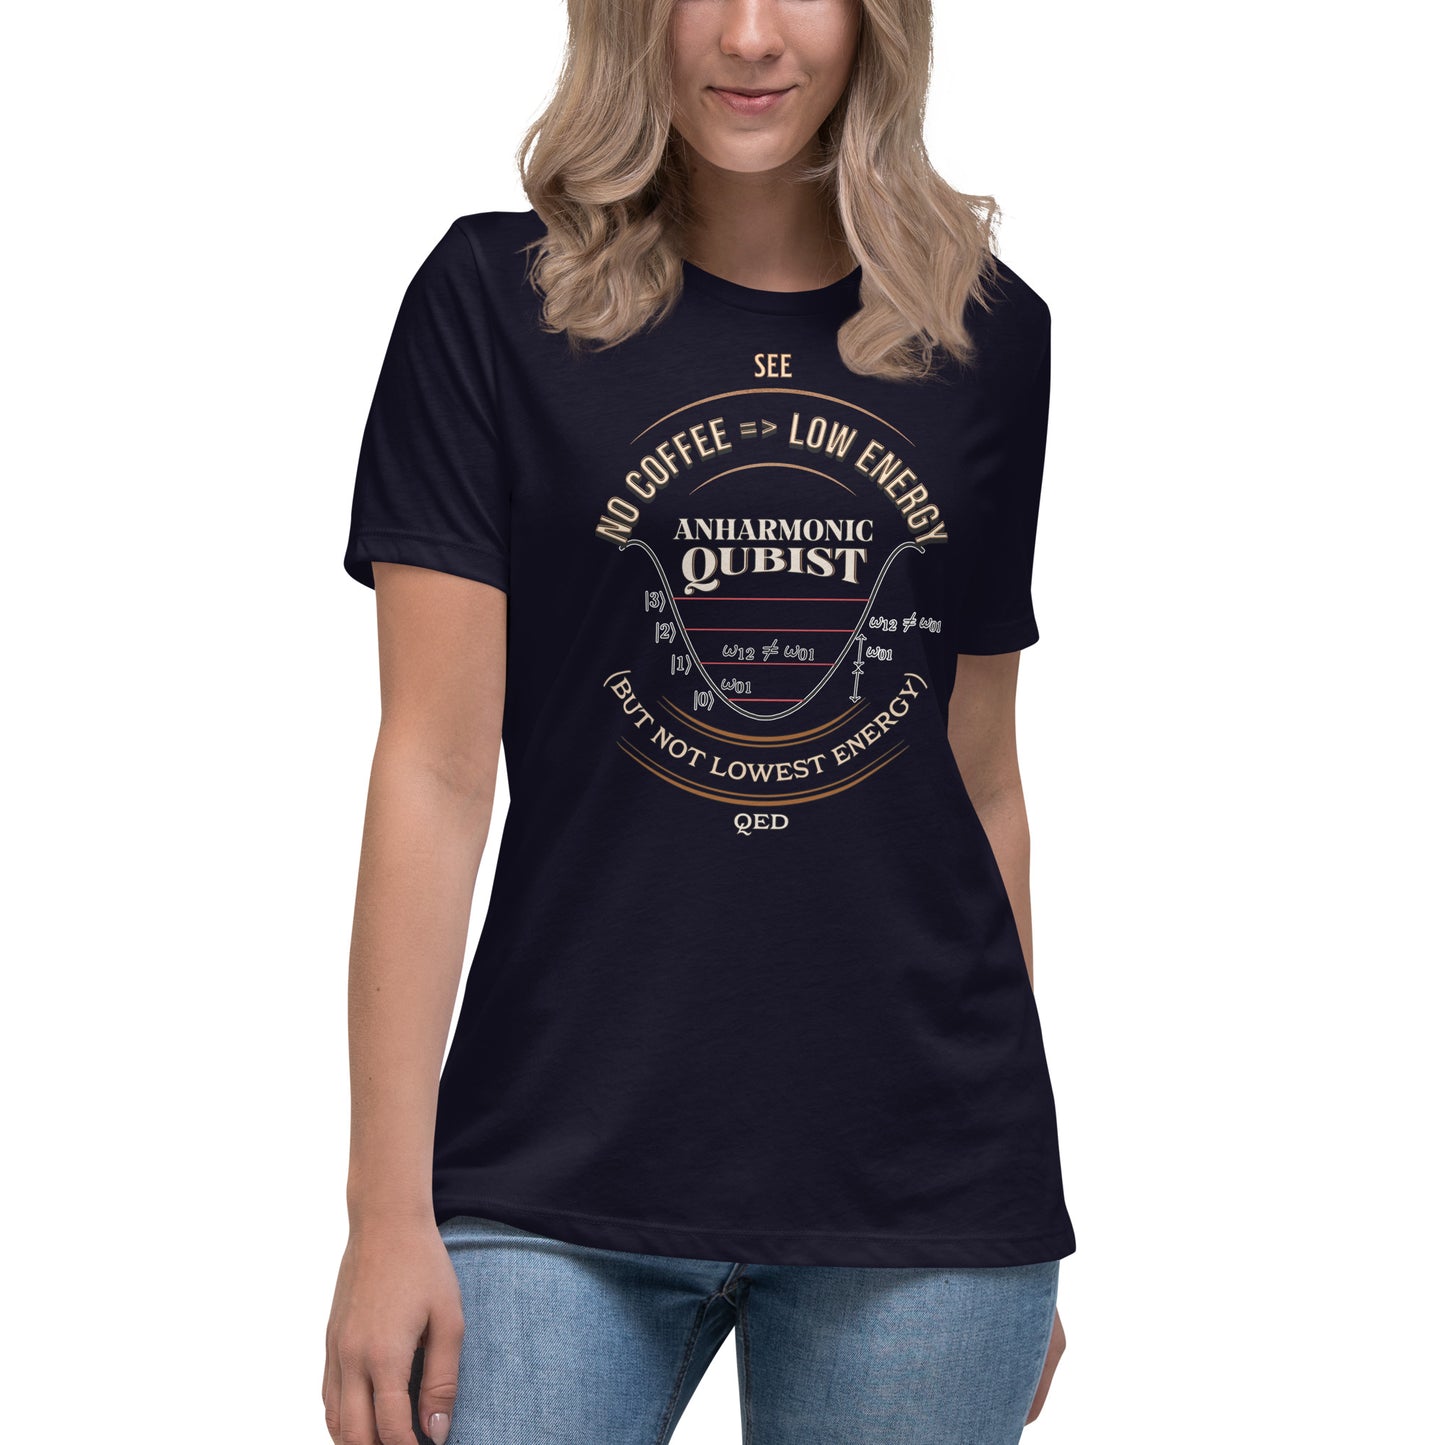 Women's Relaxed T-Shirt - Anharmonic Oscillations of a lightly caffeinated qubist, c QED